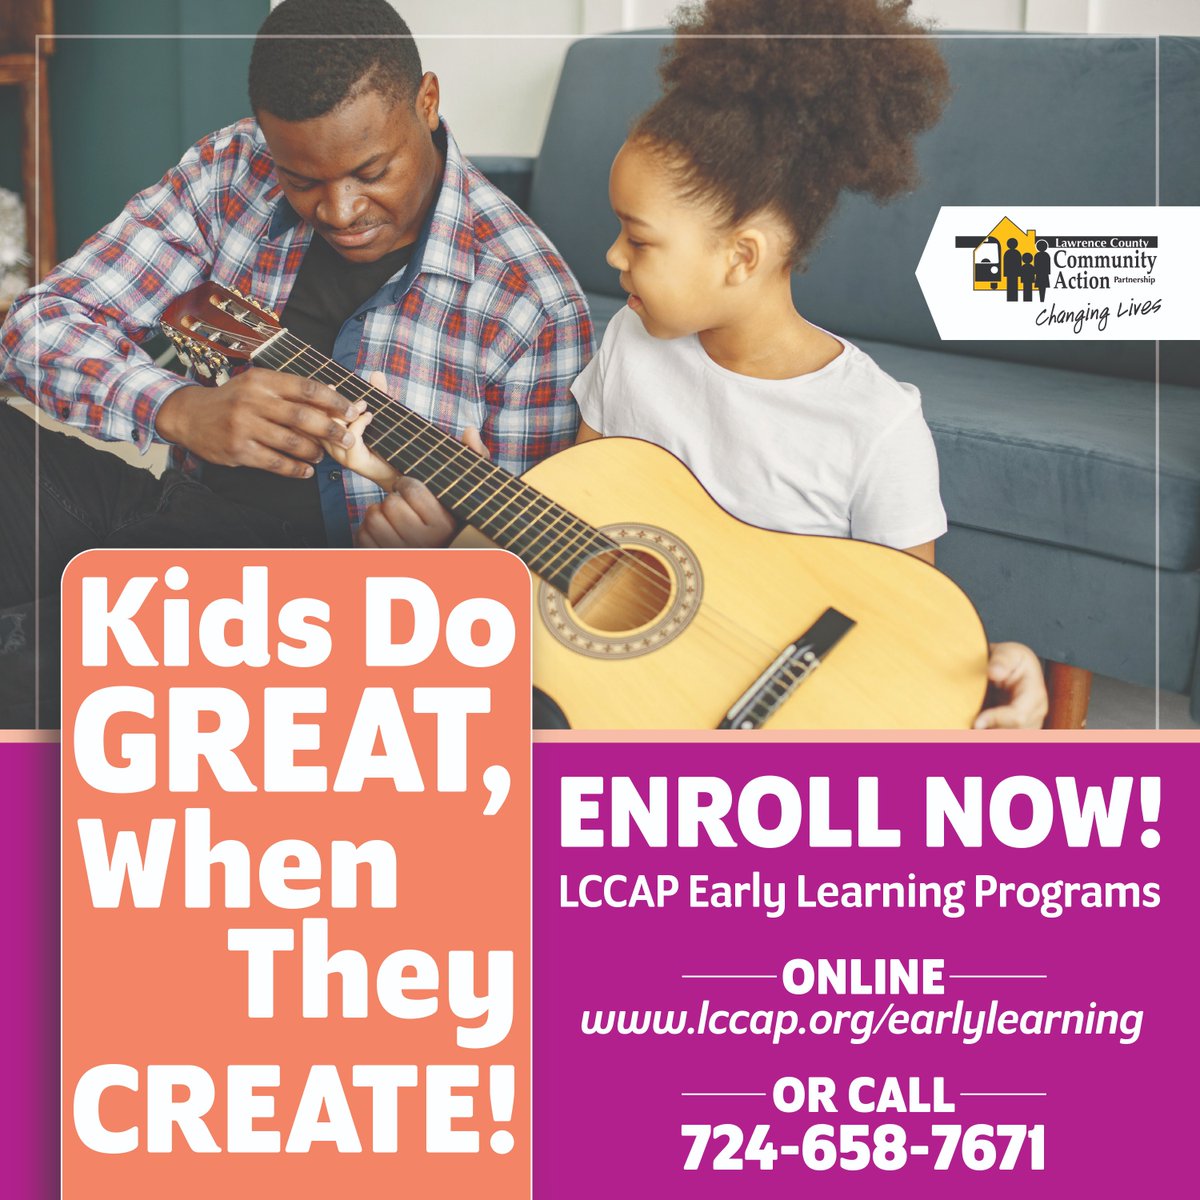 Help your child create something GREAT with LCCAP Early Learning! Now enrolling for the 2024-2025 school year! lccap.org/earlylearning #earlylearning #preschool #enrollnow